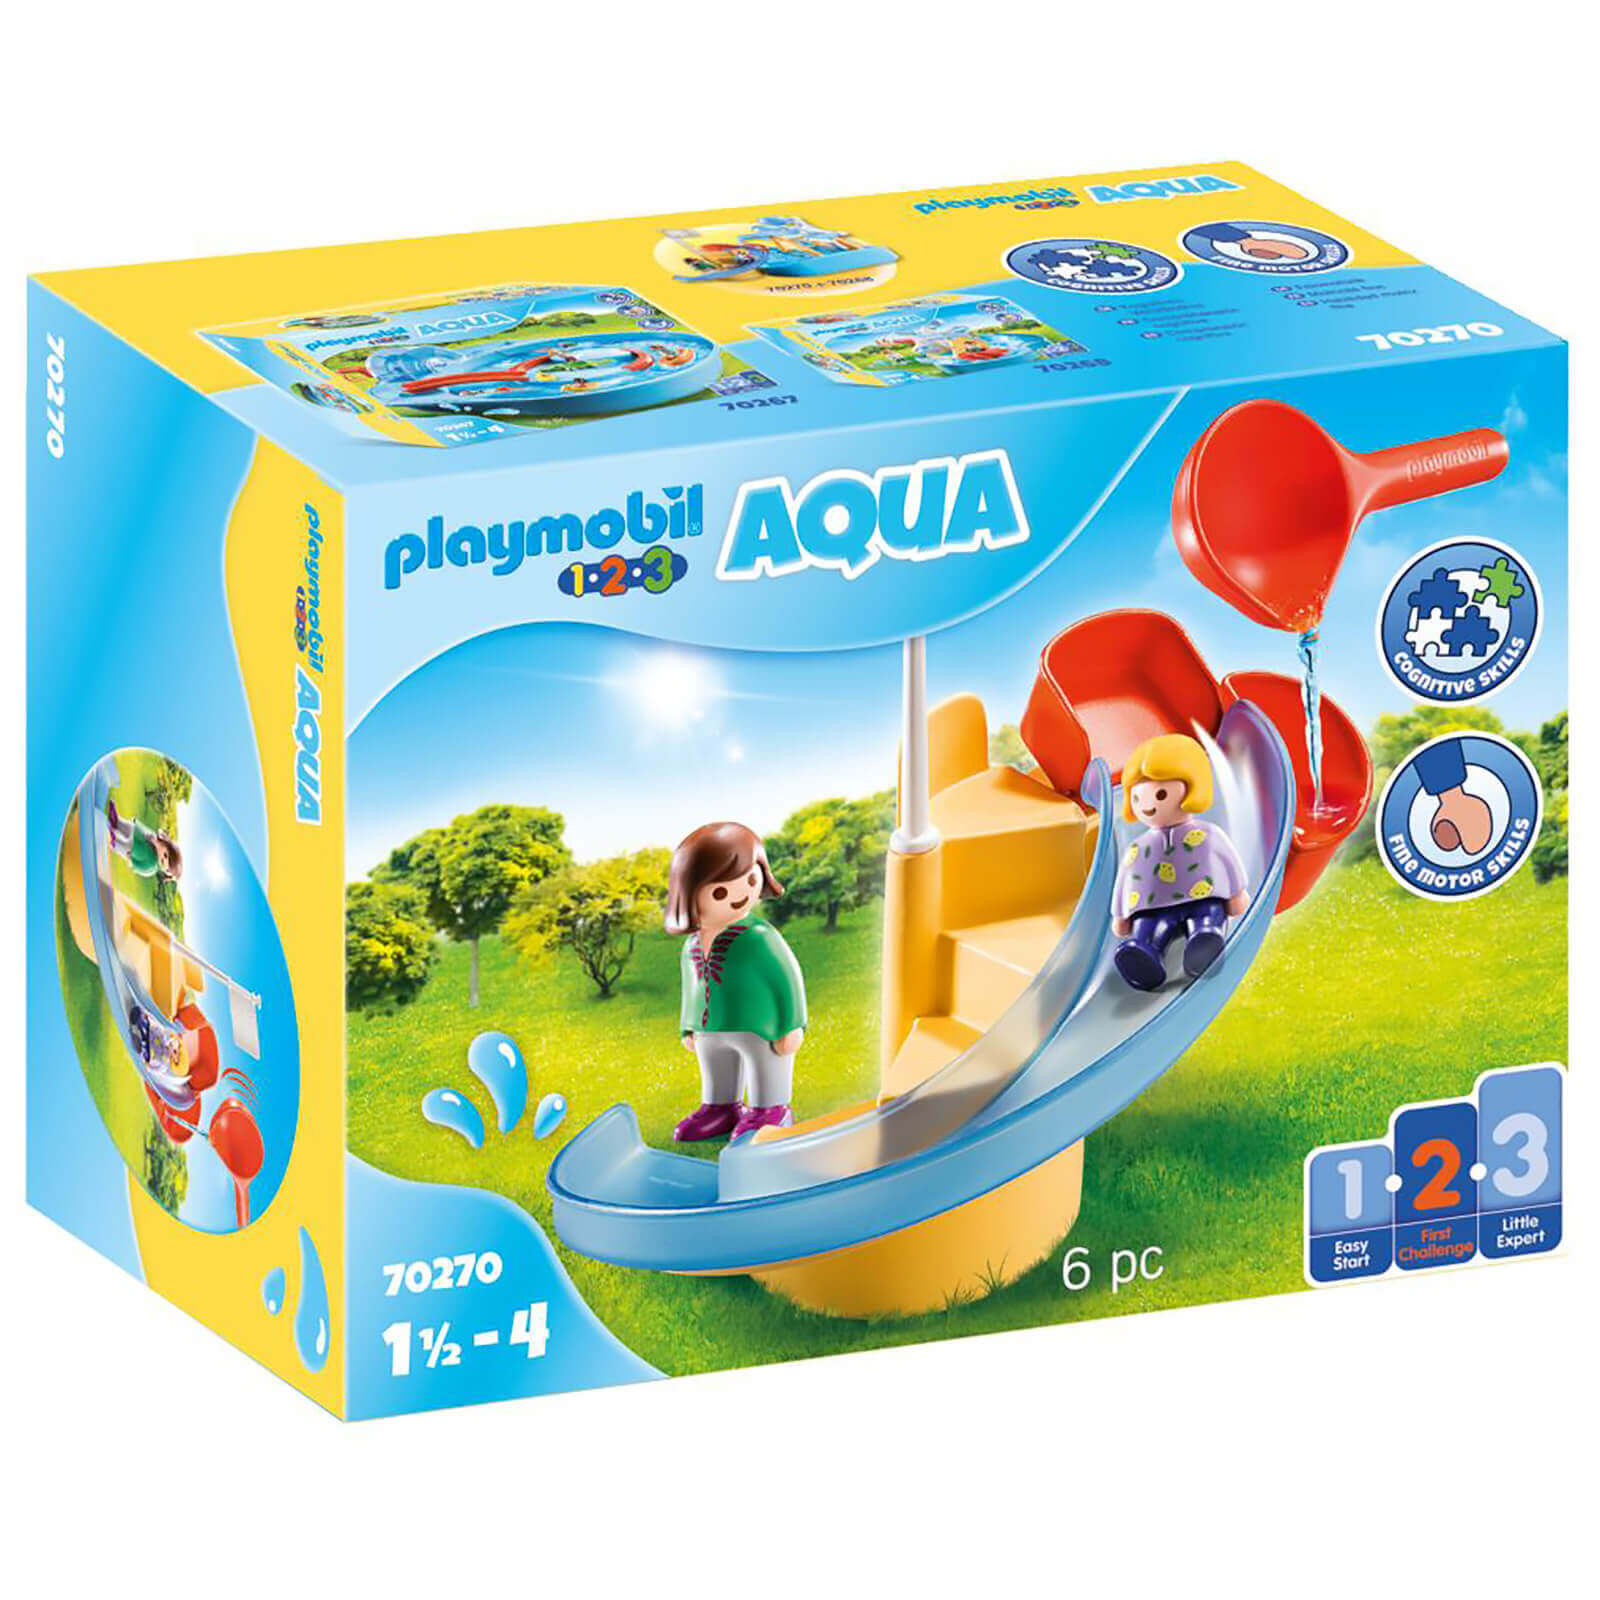 Image of Playmobil AQUA Water Slide For 18+ Months (70270)